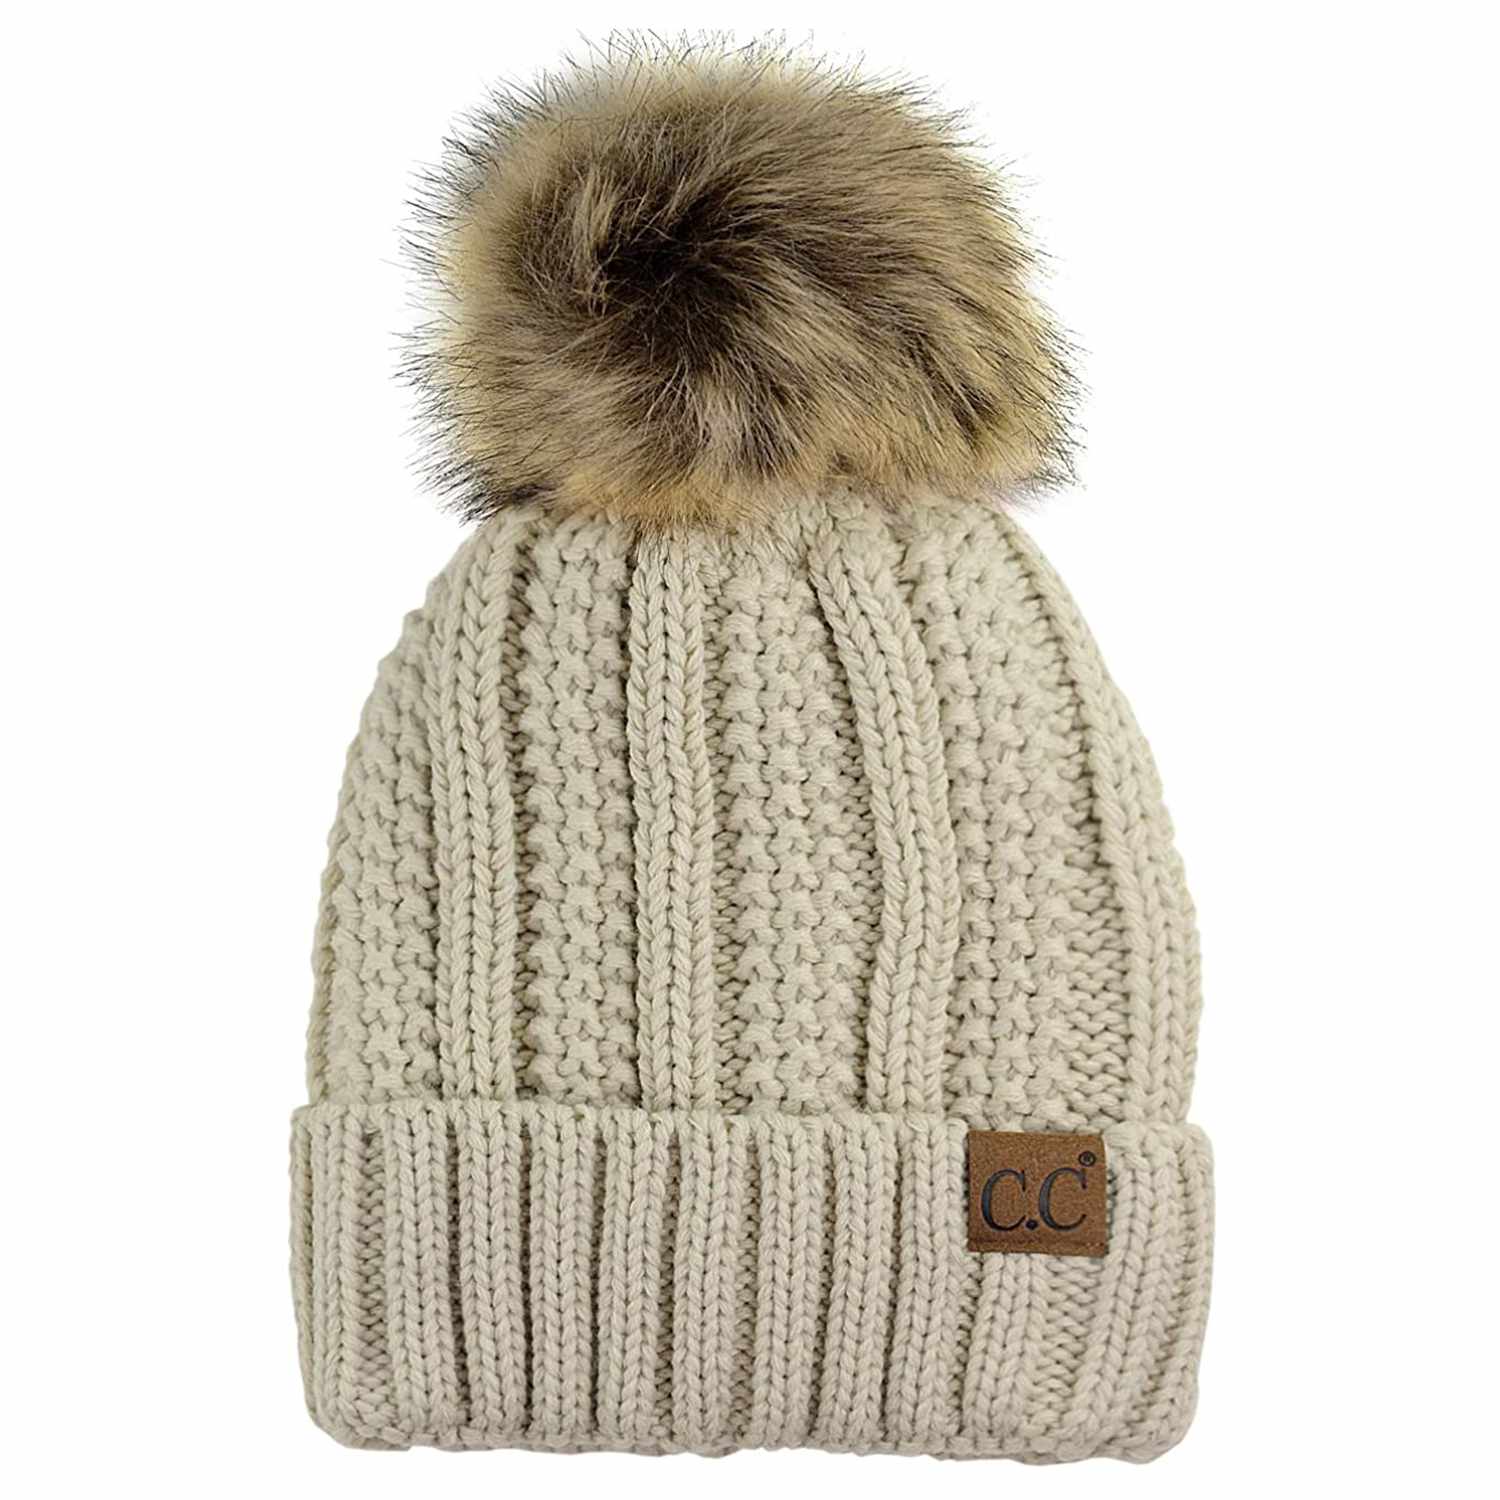 Winter Real Fur Pom Beanie Hat Warm Oversized Chunky Cable Knit Slouch Beanie Hats for Women